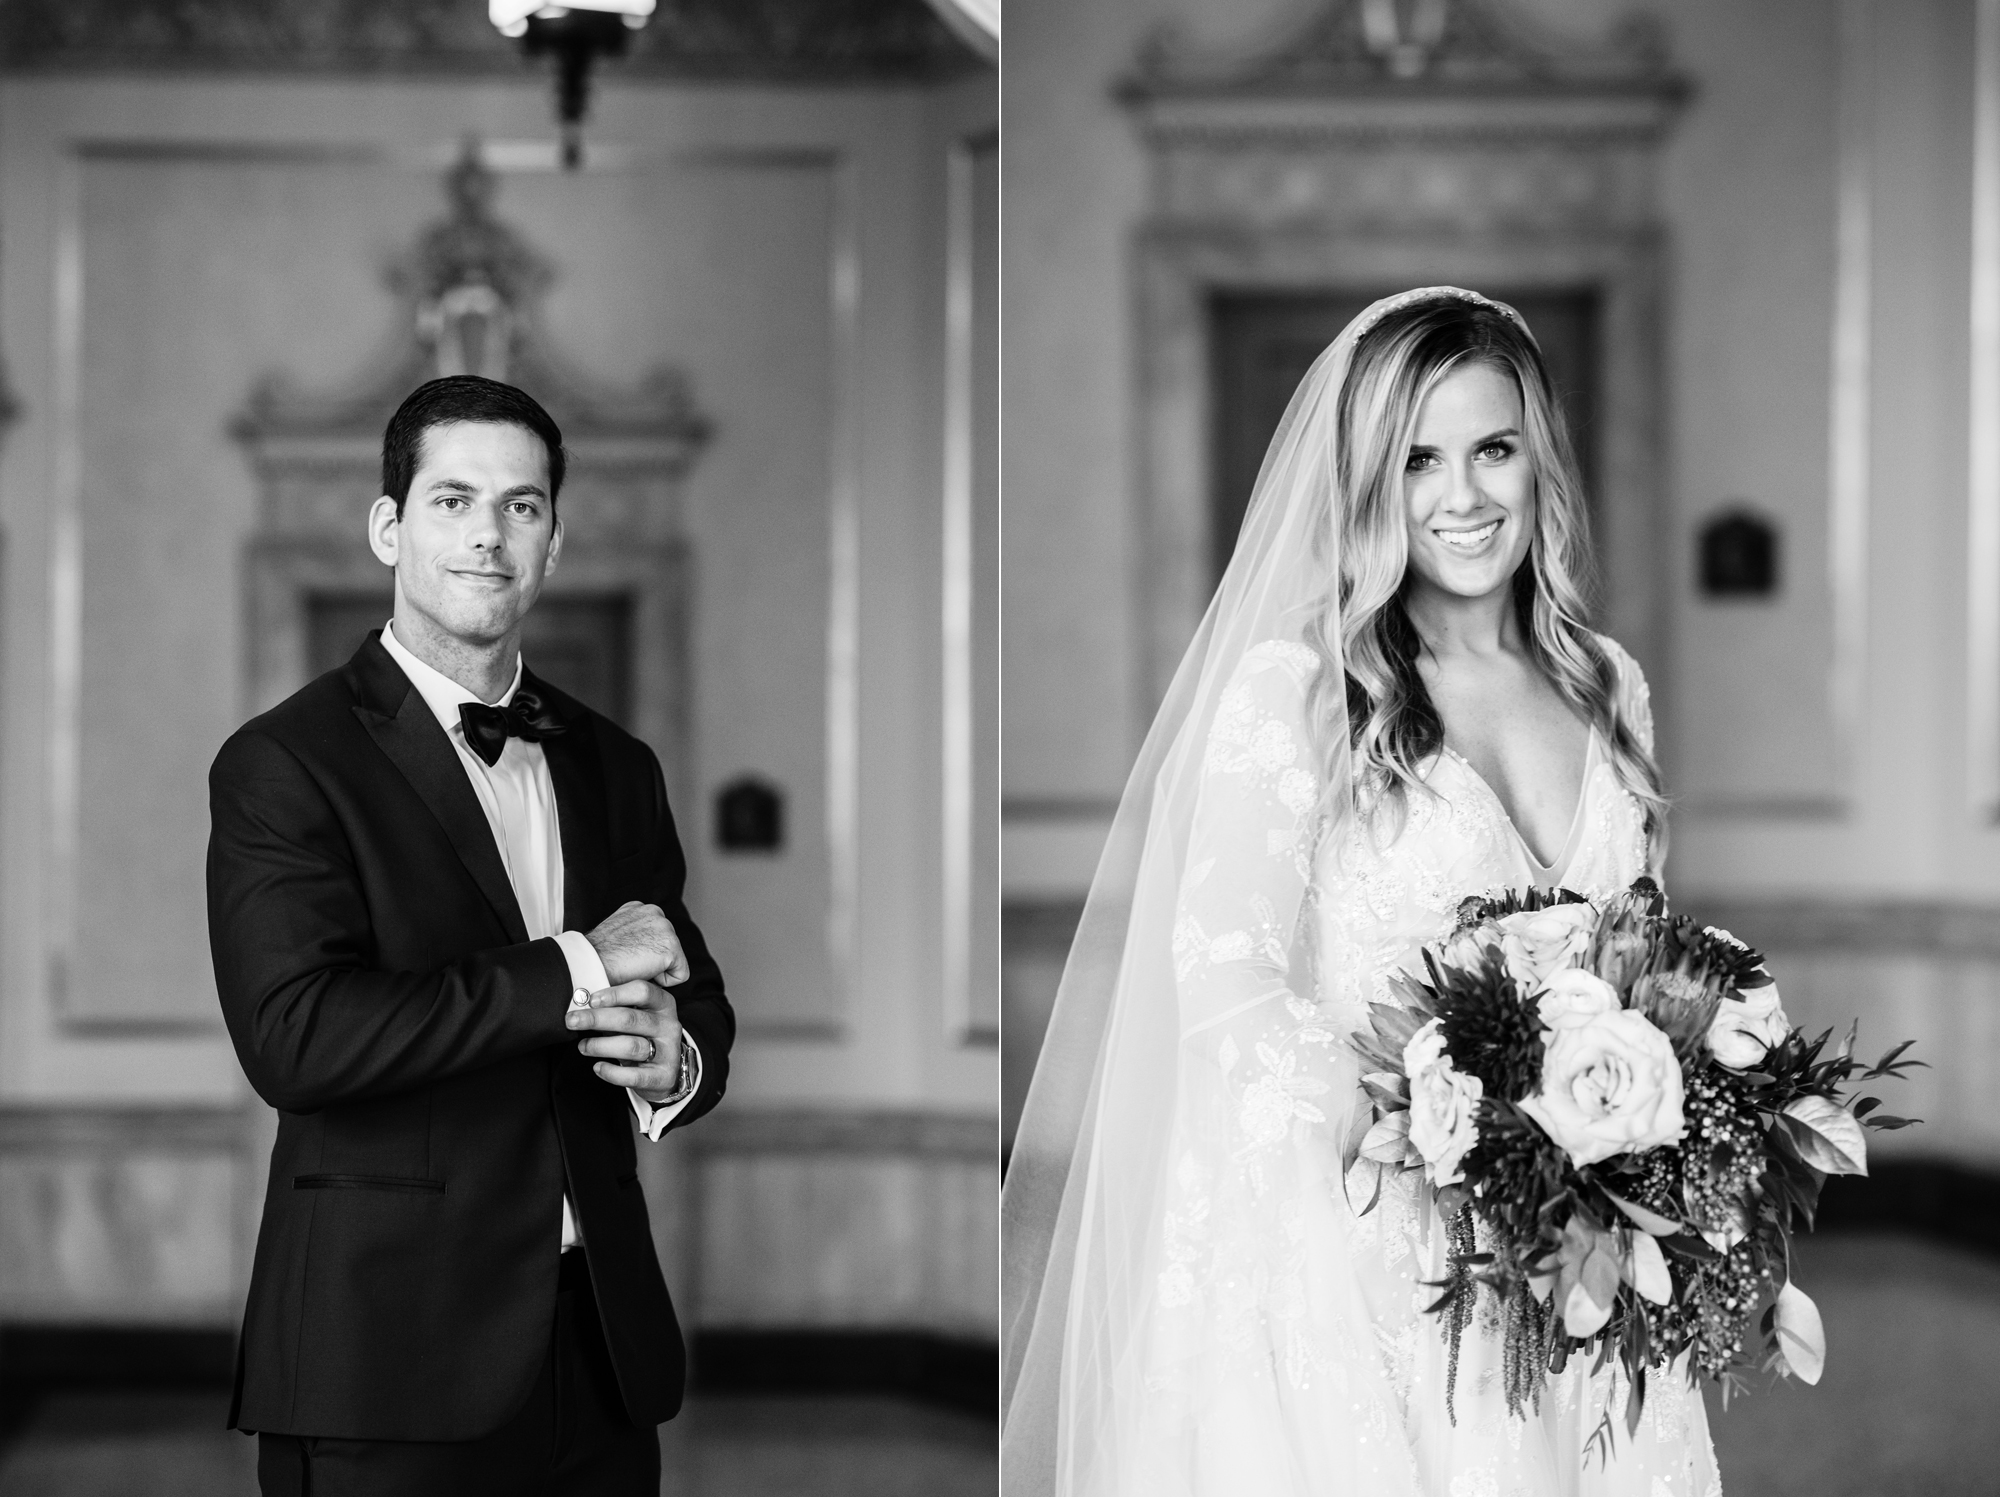 Bride & Groom at the Palais Royale after their wedding ceremony at the St. Paul’s Memorial United Methodist Church